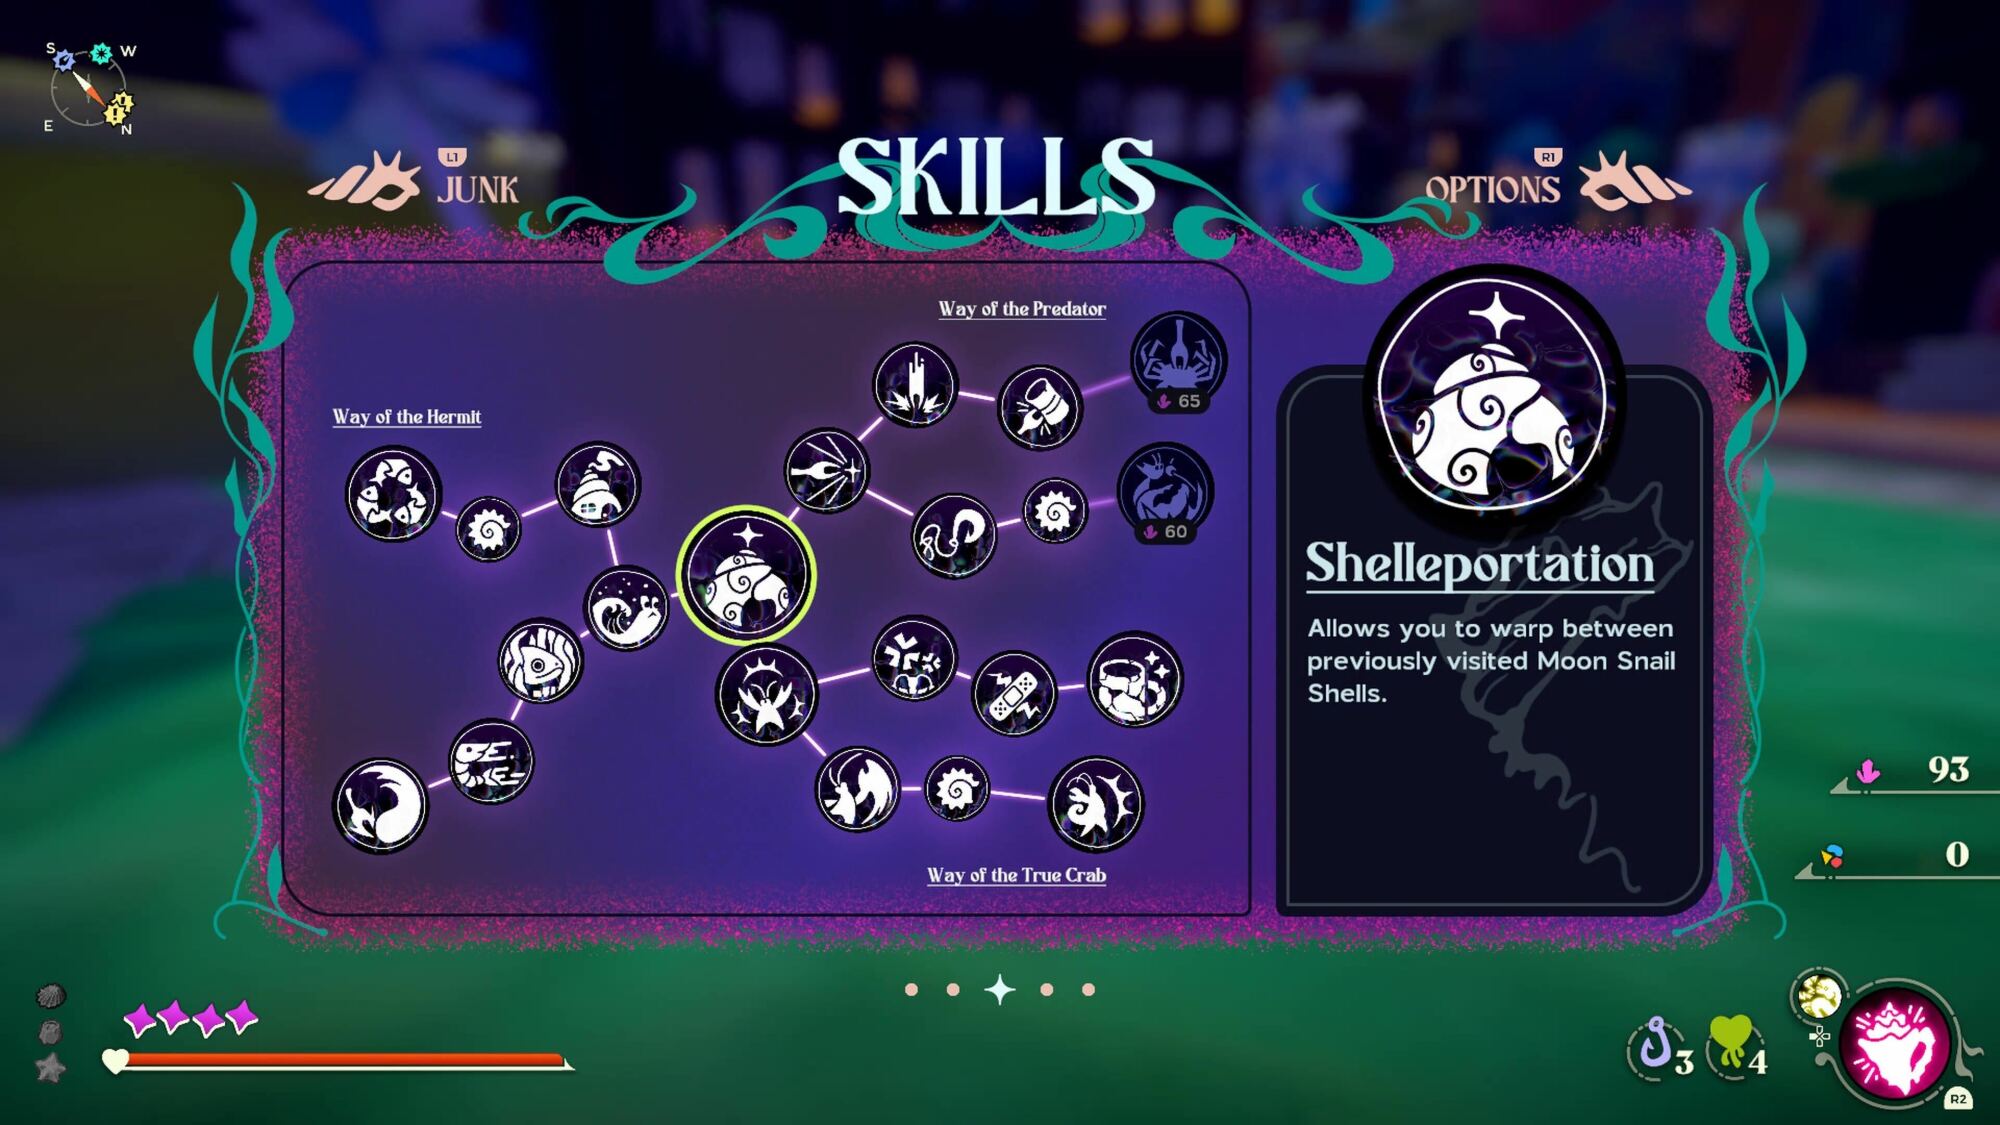 A game 'Skills' screen showing unlocked and locked abilities arranged in interconnected circles, with the highlighted ability being 'Shelleportation.'